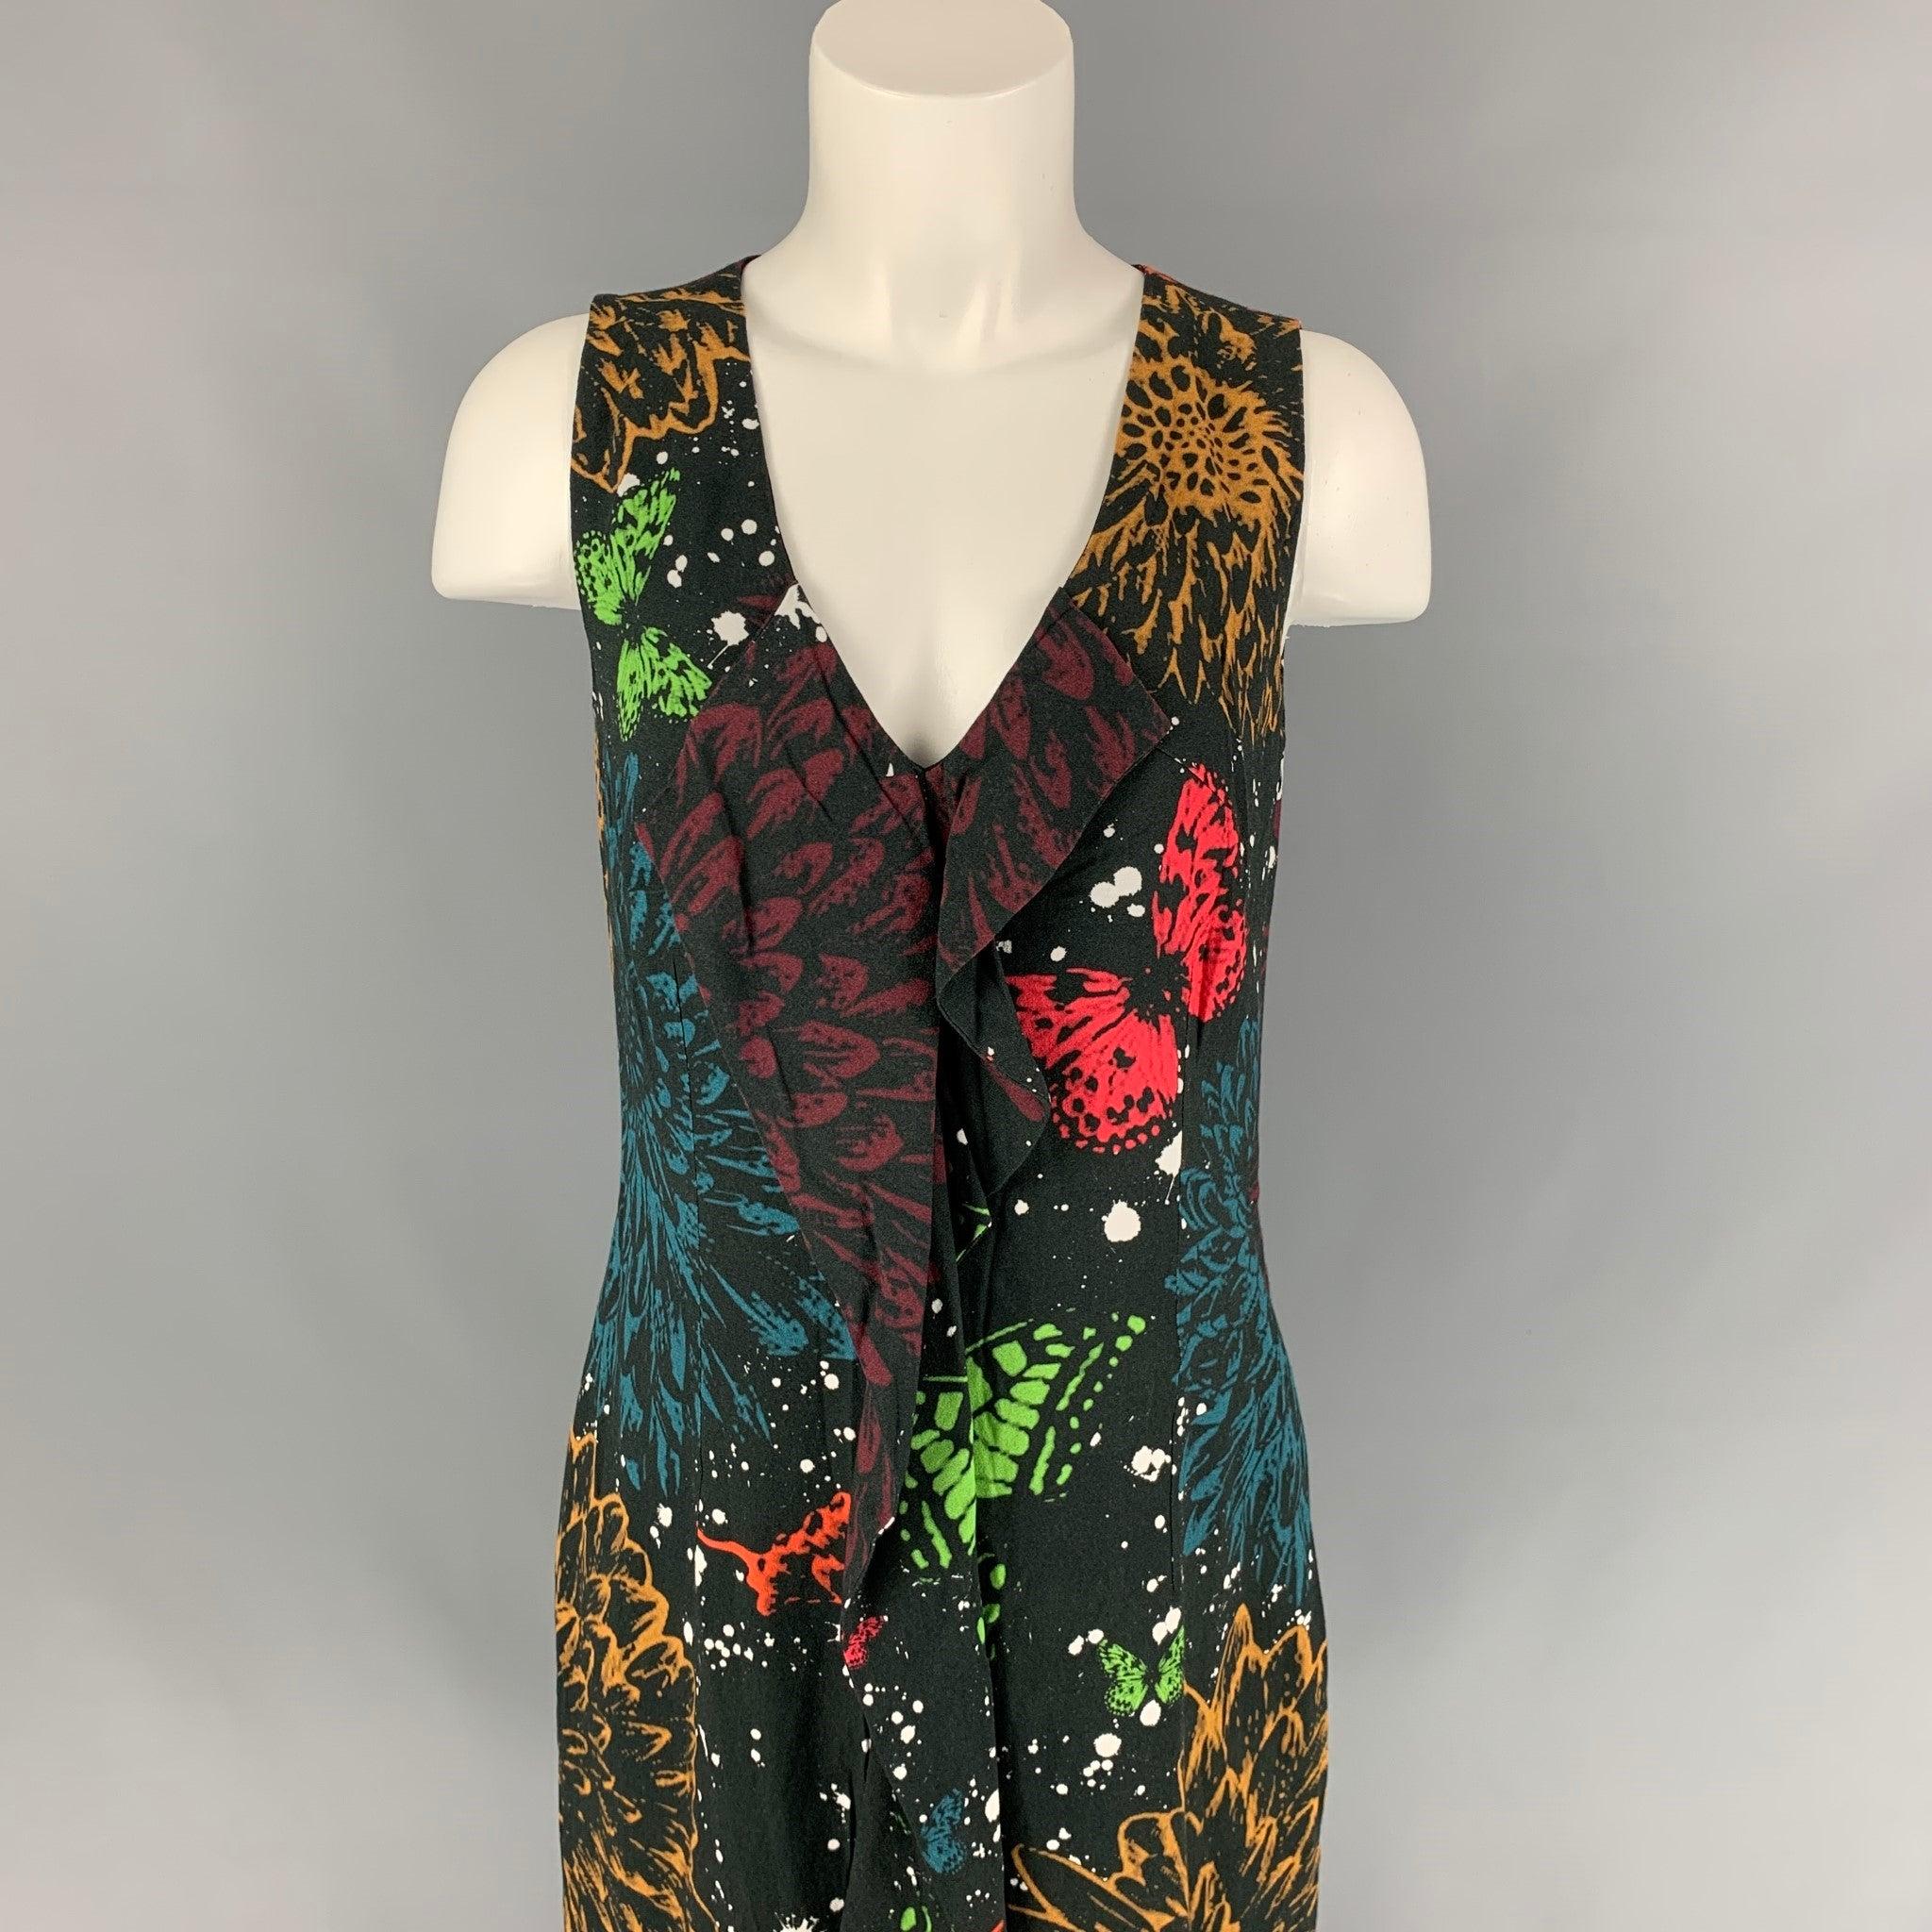 JOHN RICHMOND dress comes in a multi-color print viscose with a slip liner featuring a shift style, front ruffle detail, and a back zip up closure.
New With Tags.
 

Marked:   42 

Measurements: 
  Bust: 34 inches  Waist: 32 inches  Hip: 38 inches 